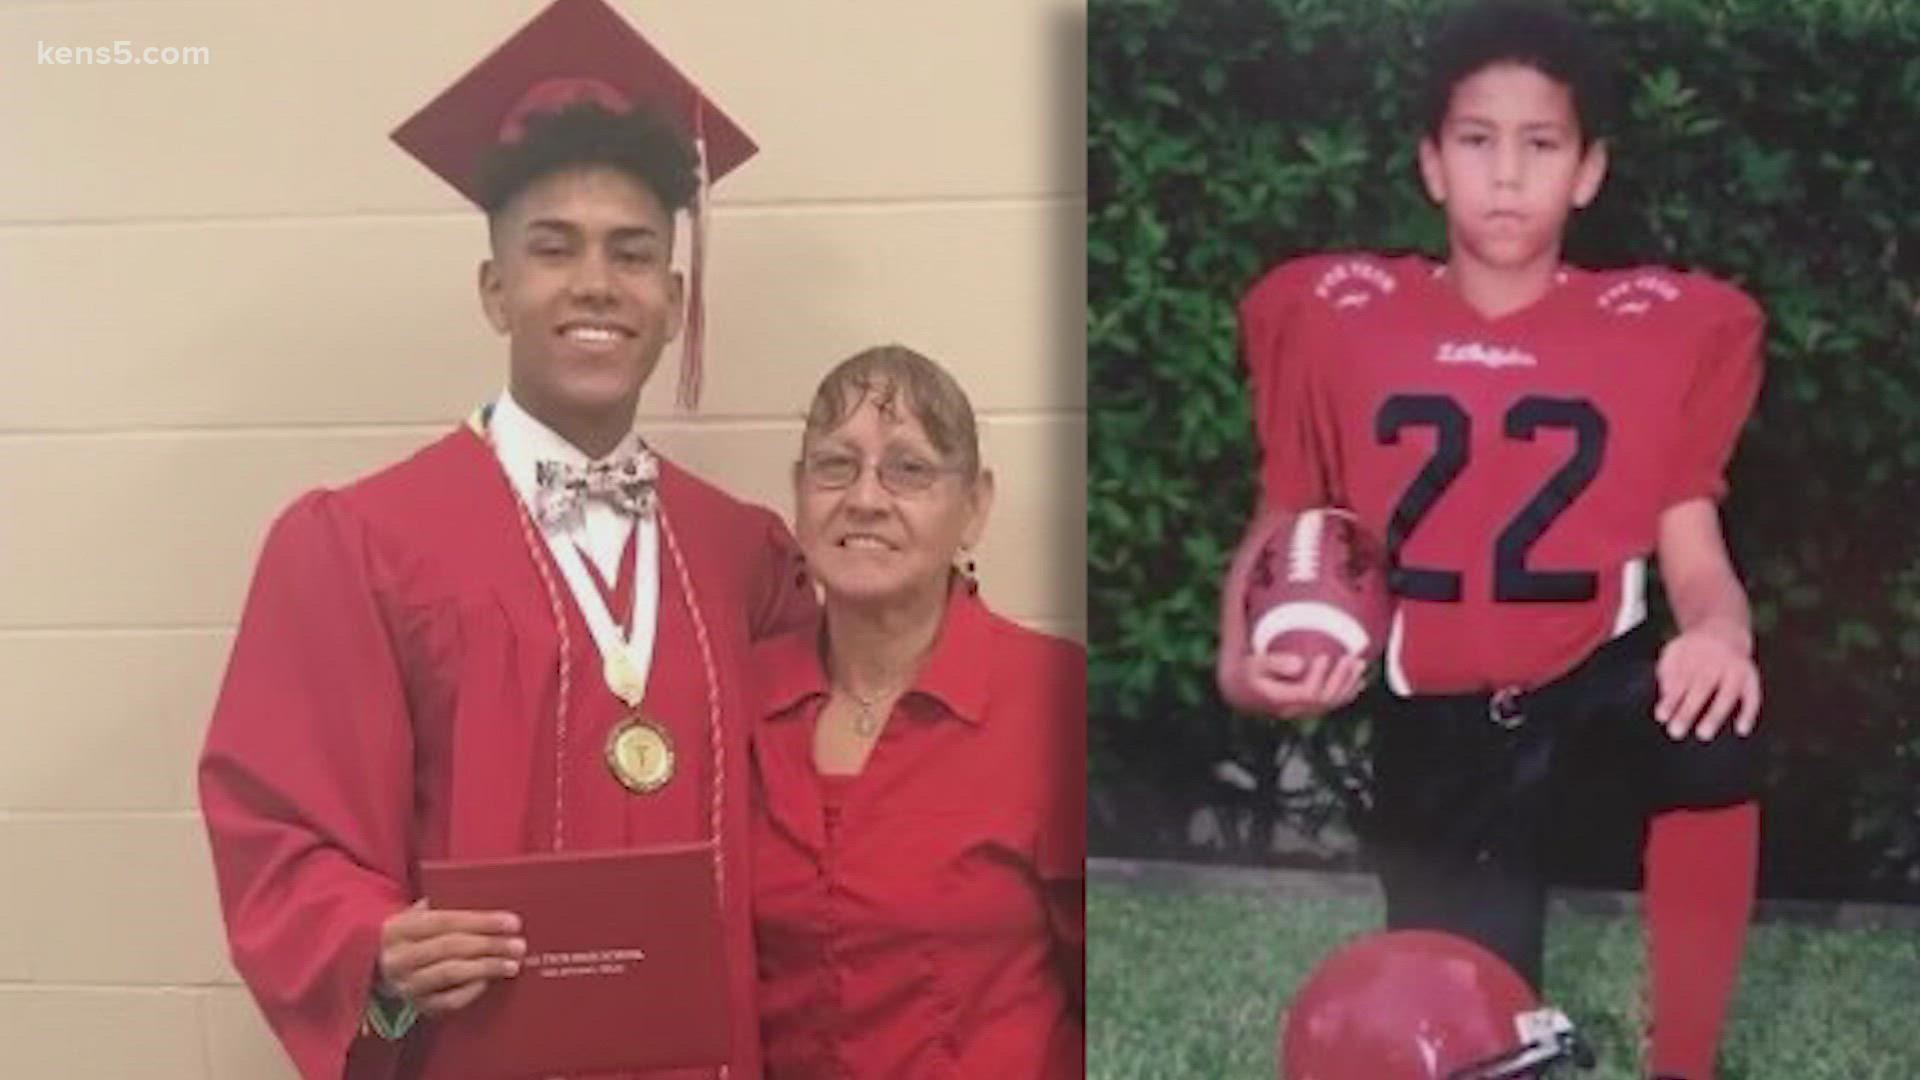 Family and friends of 21-year-old Angel Gonzalez are remembering his love for basketball and his leadership instincts on and off the court.